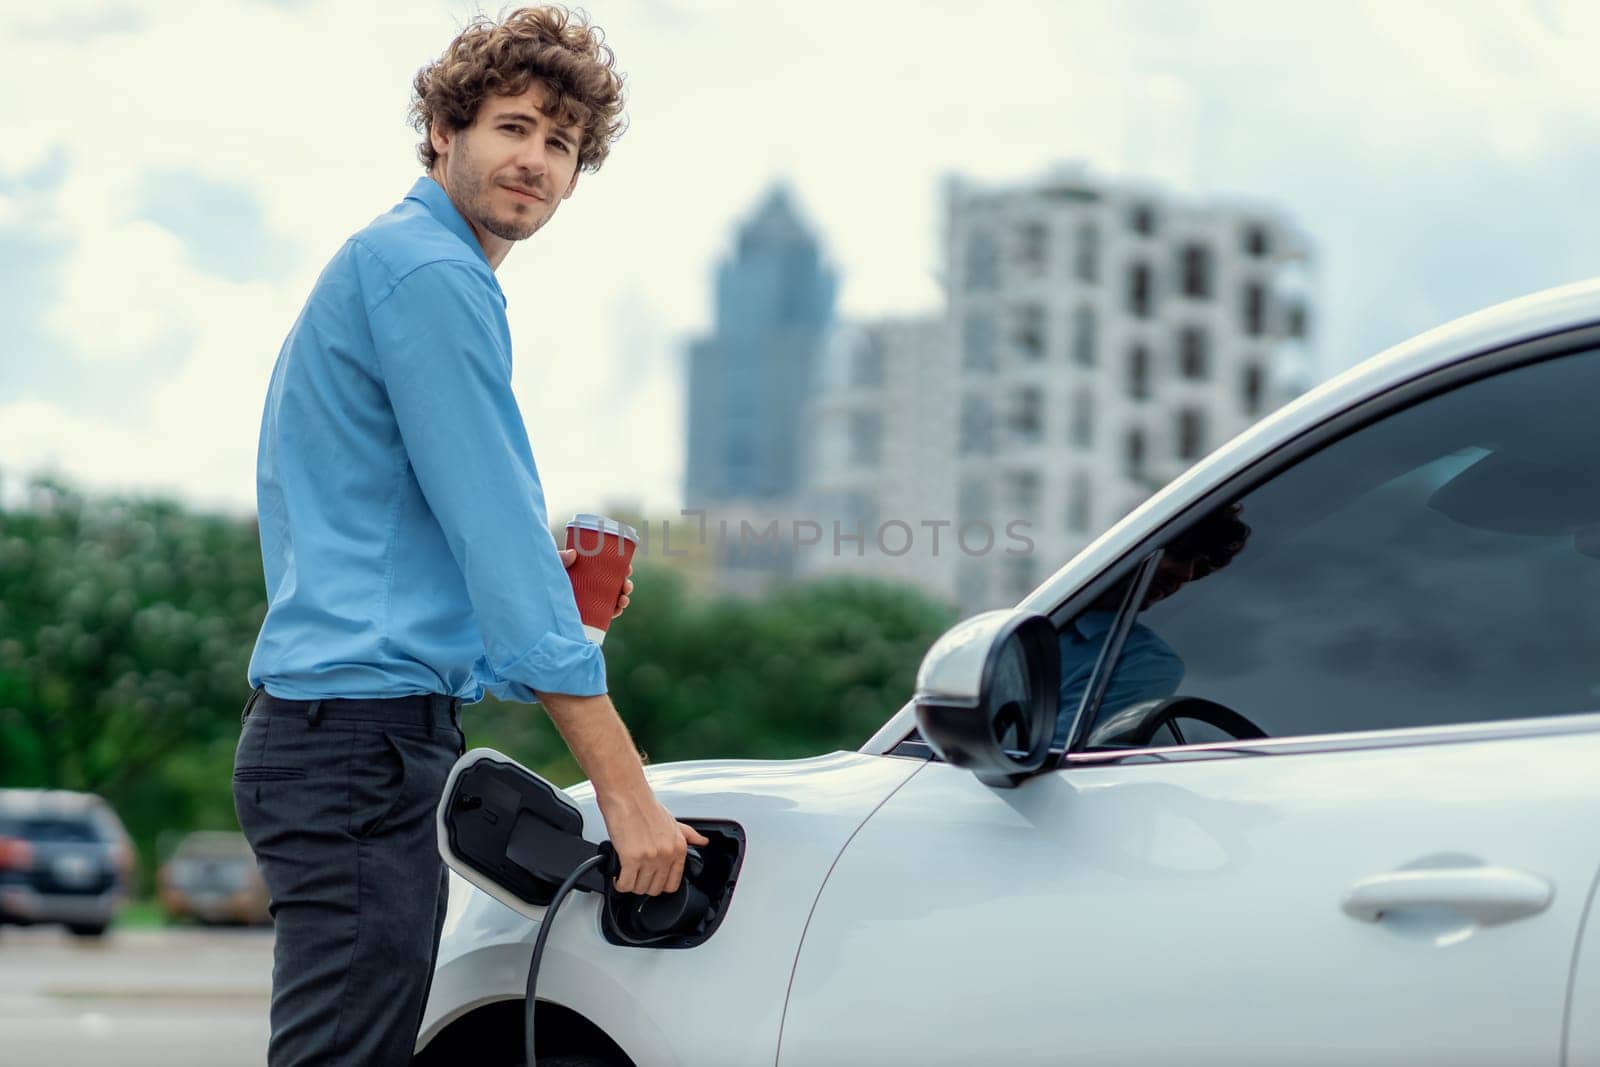 Progressive concept of EV car at charging station with blur man background by biancoblue